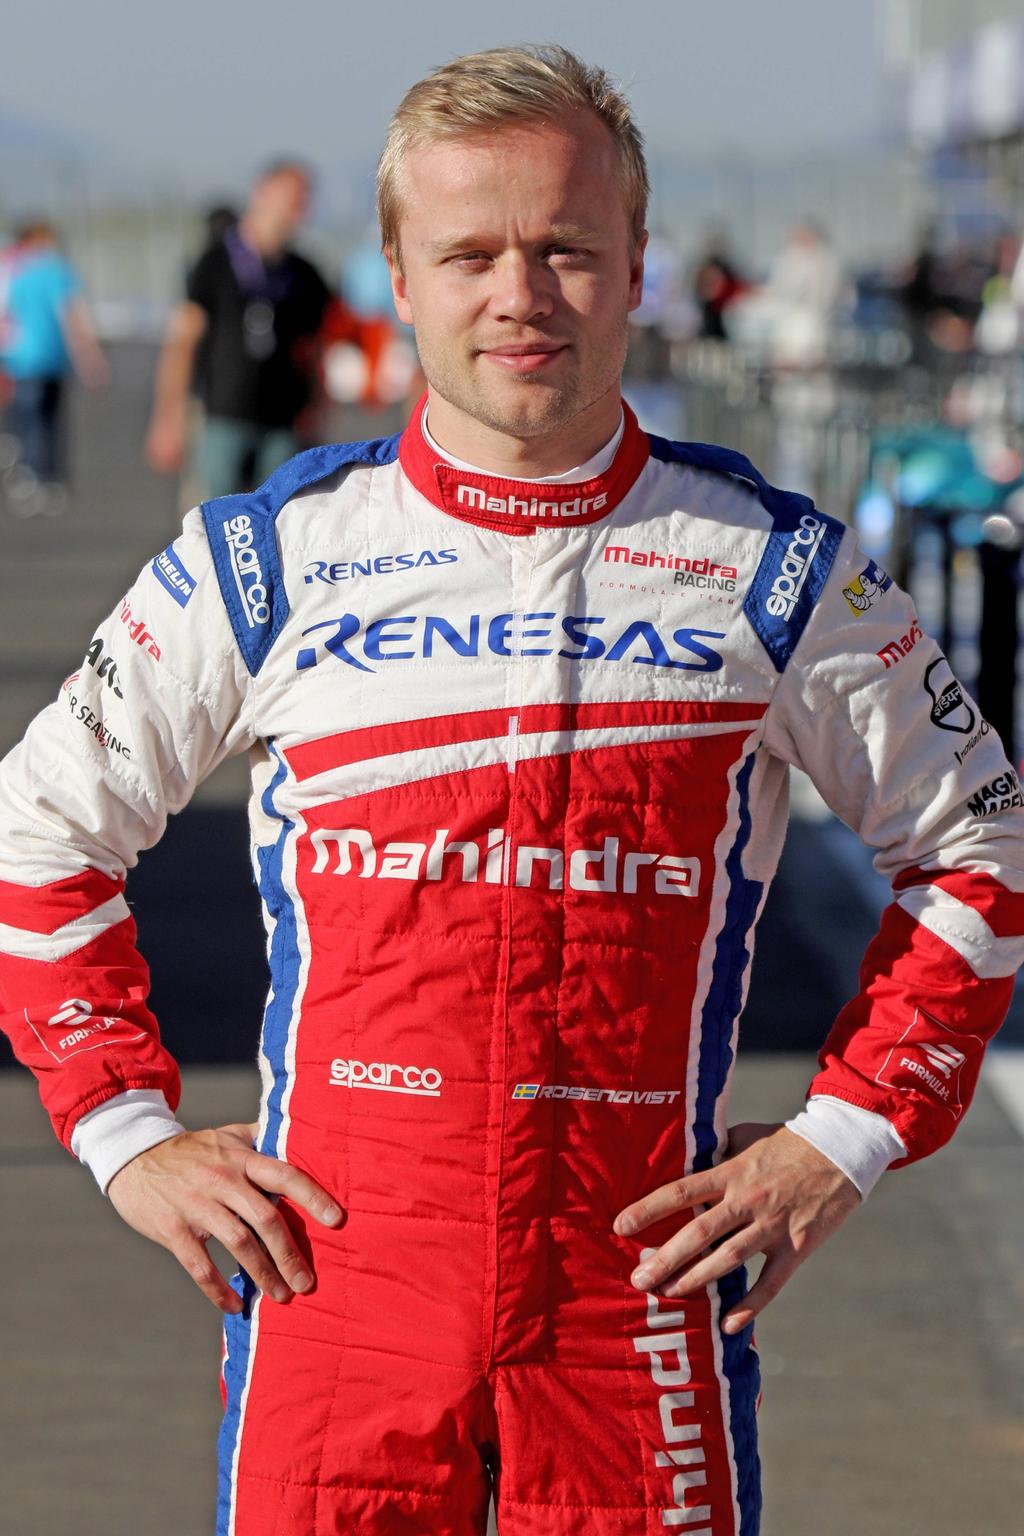 INTRODUCTION Felix Rosenqvist, 26, is a Swedish racing driver, competing in the ABB FIA Formula E Championship with Mahindra Racing and in Japanese Super GT with Team LeMans.